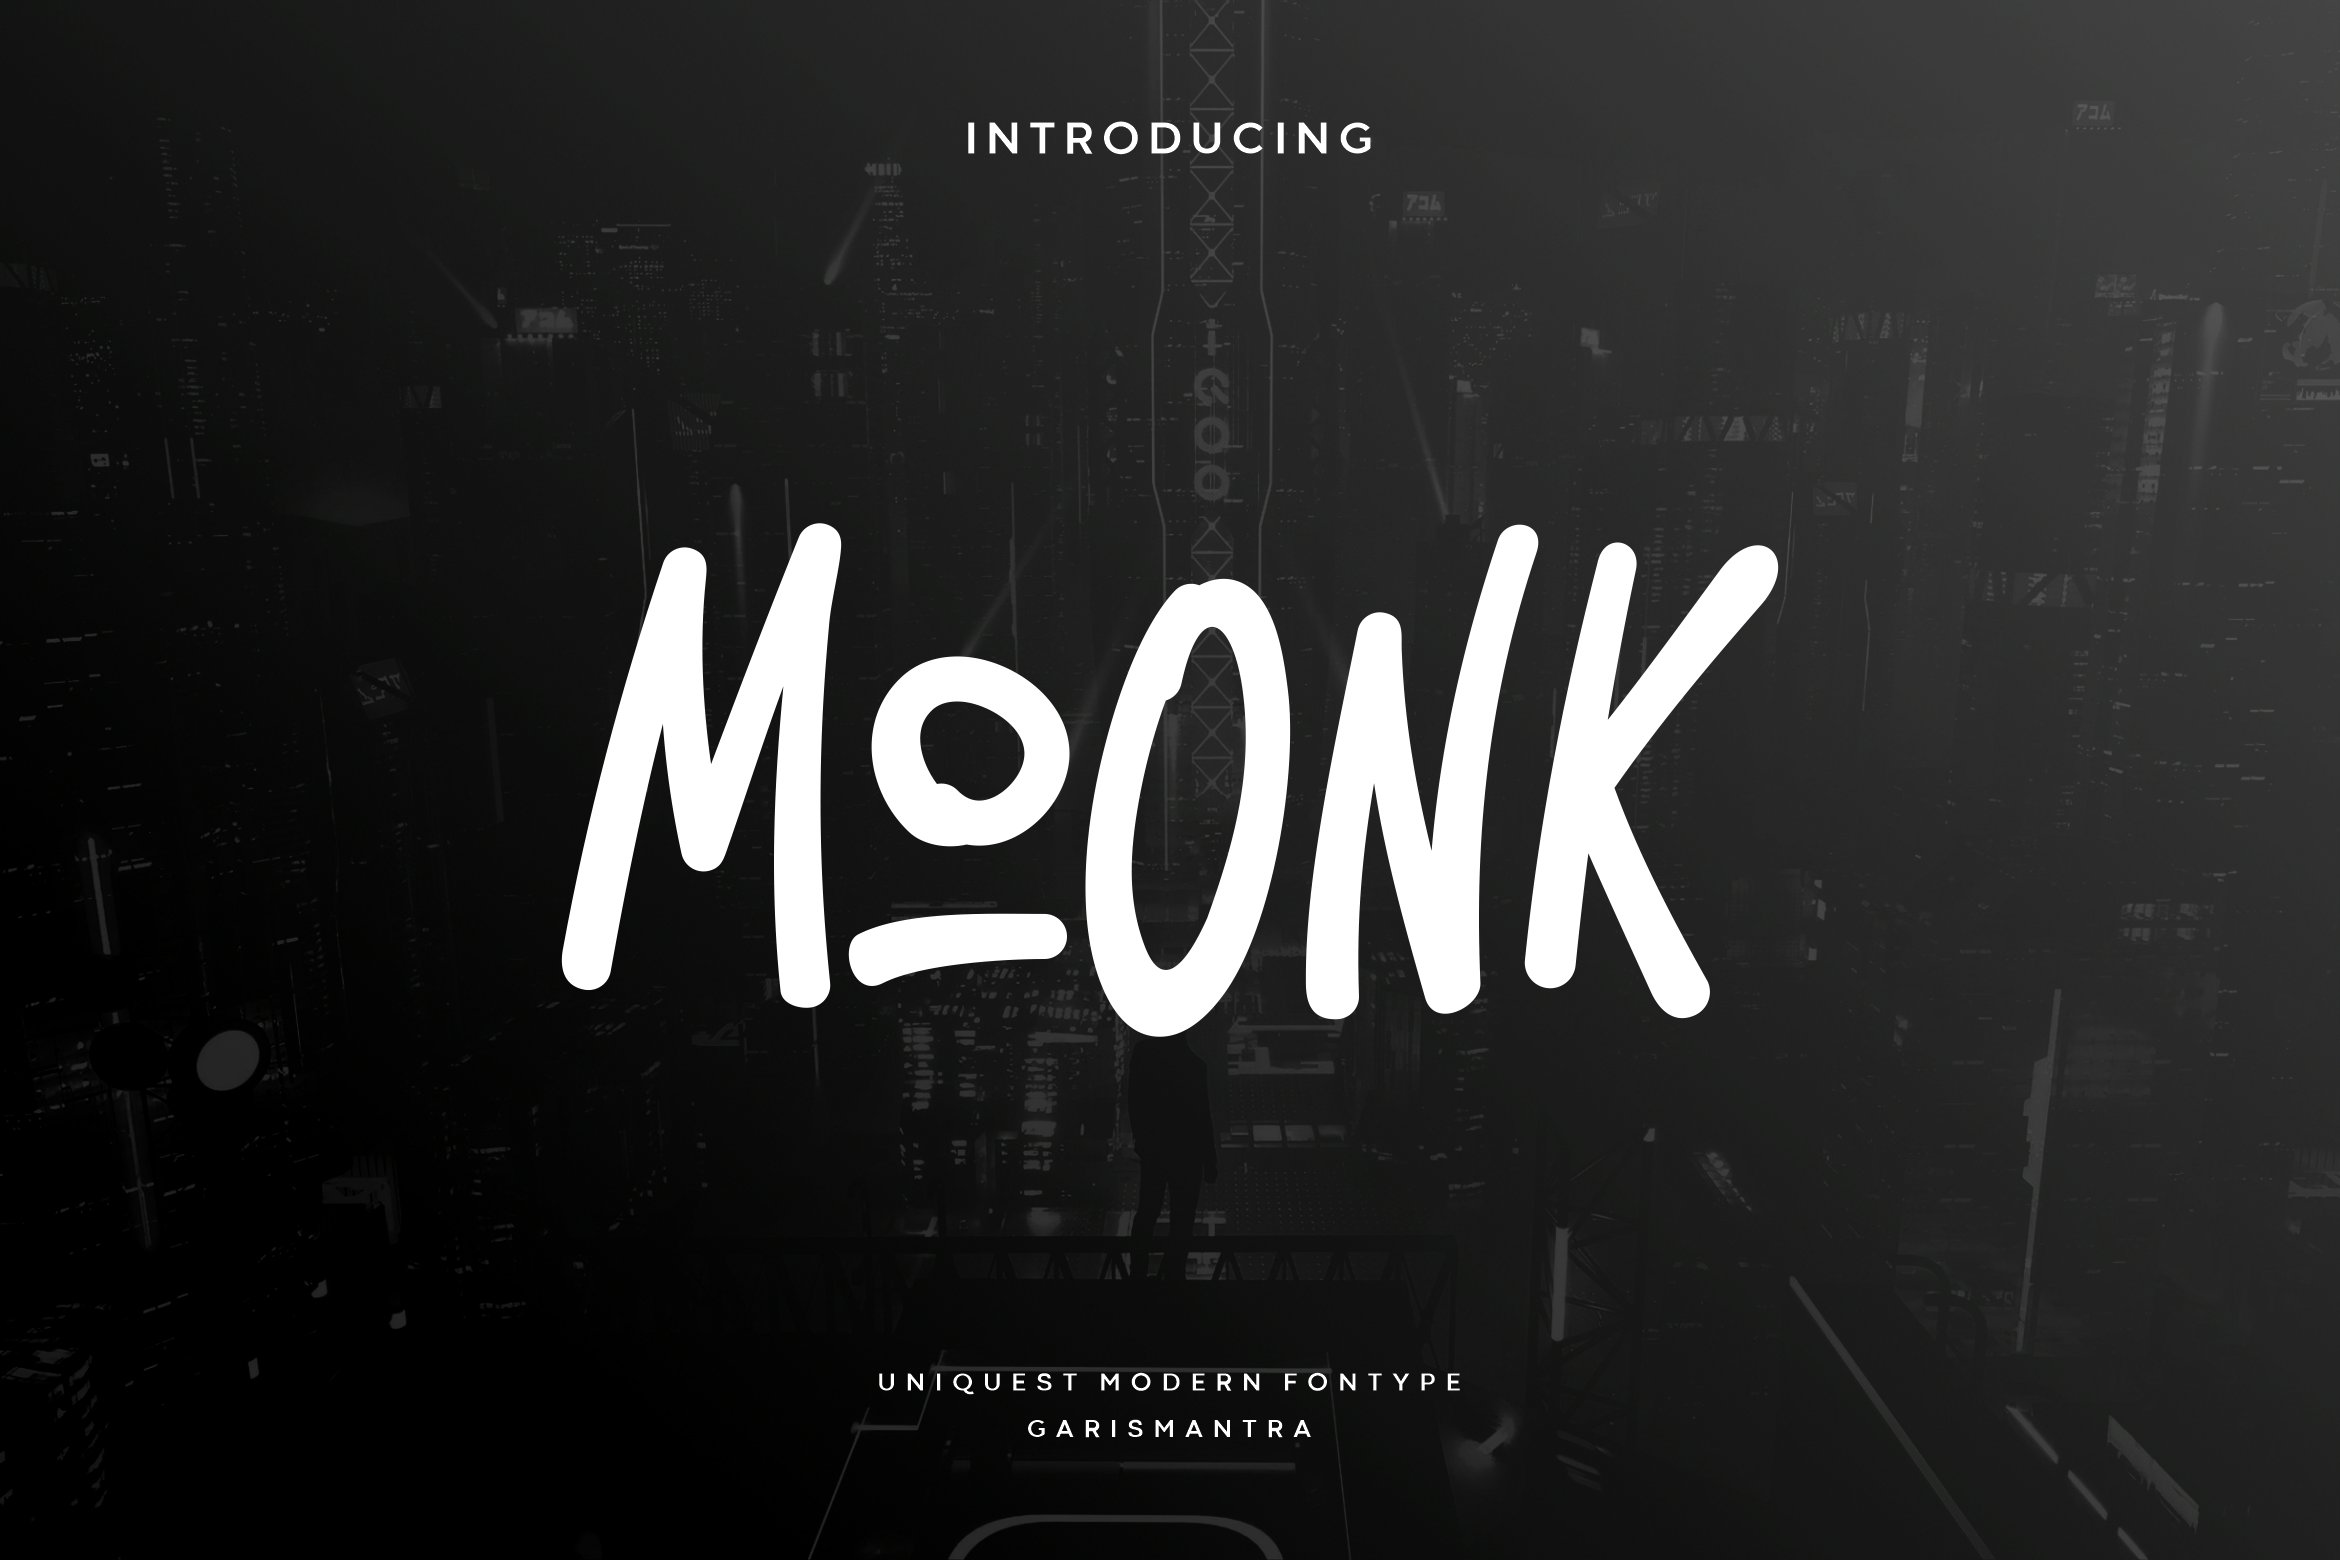 Moonk cover image.